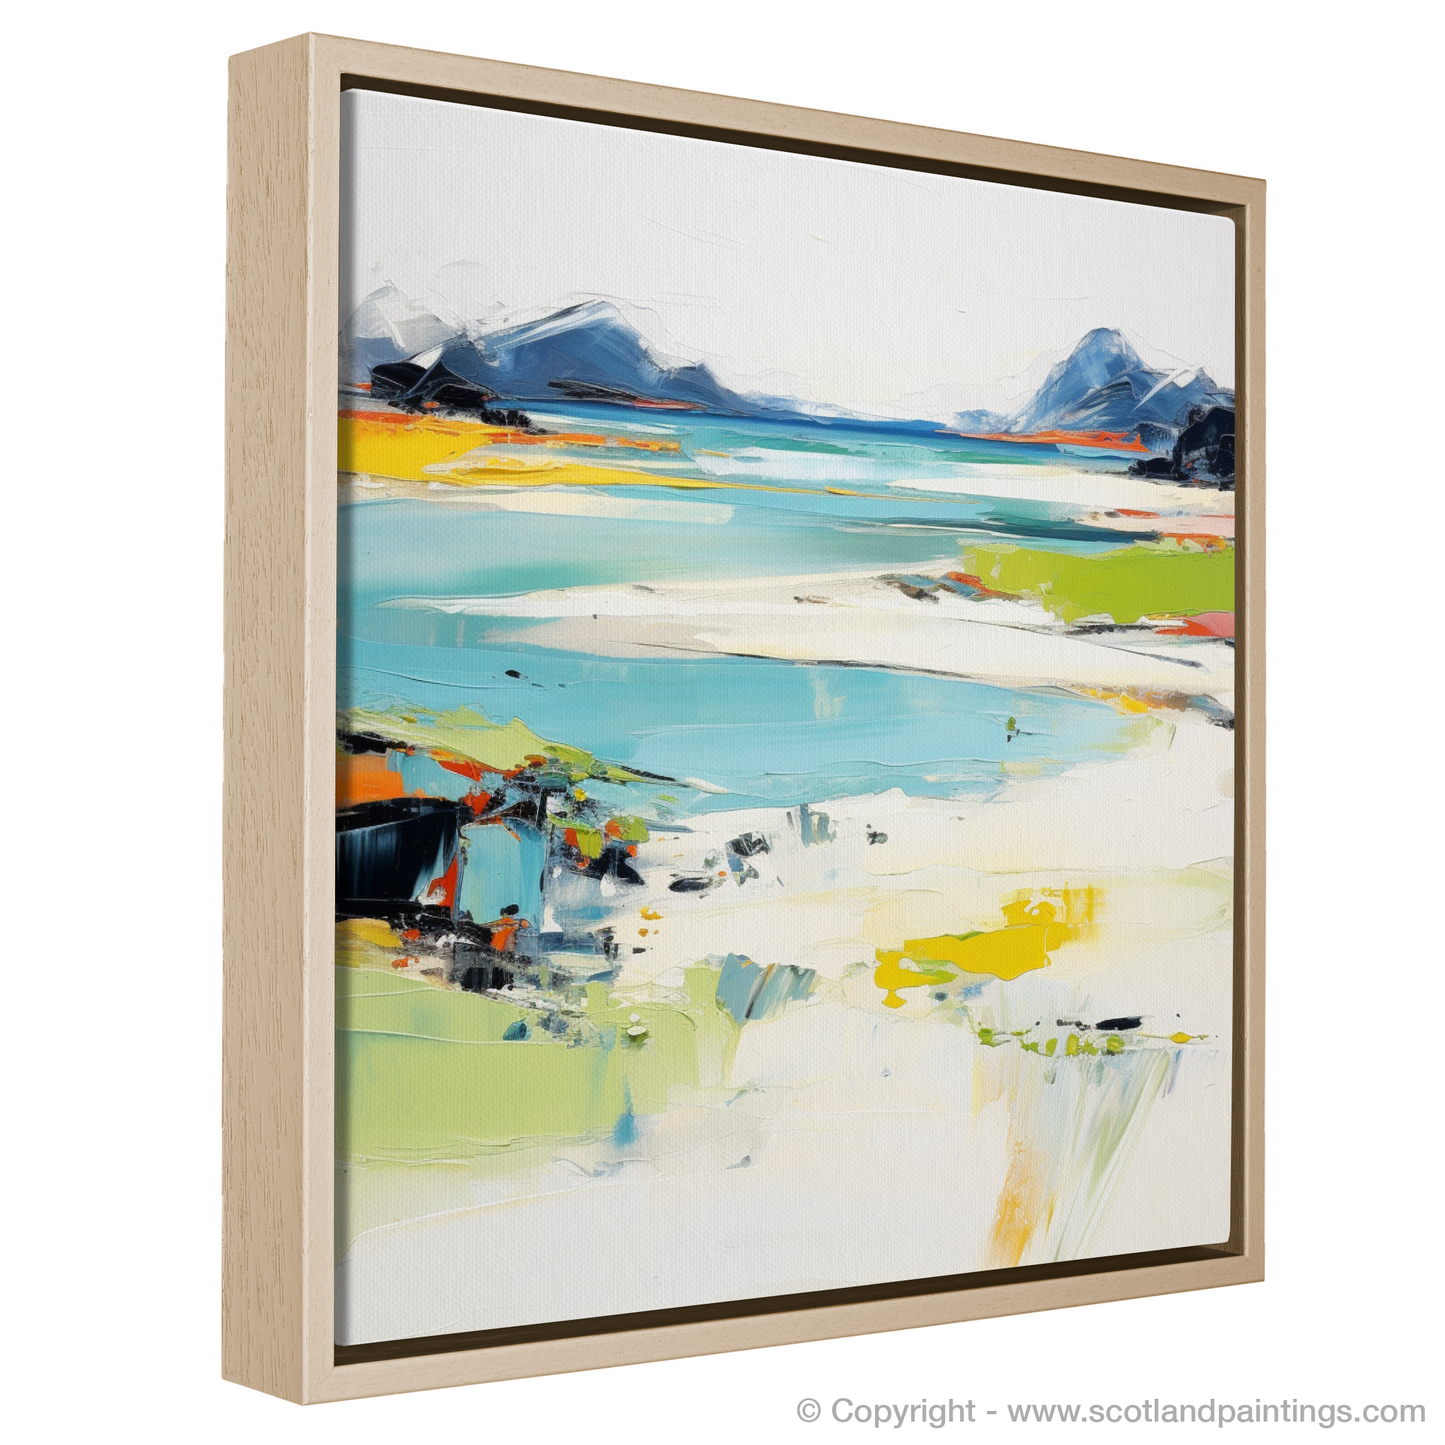 Painting and Art Print of Silver Sands of Morar in summer entitled "Summer Hues of Silver Sands Morar".